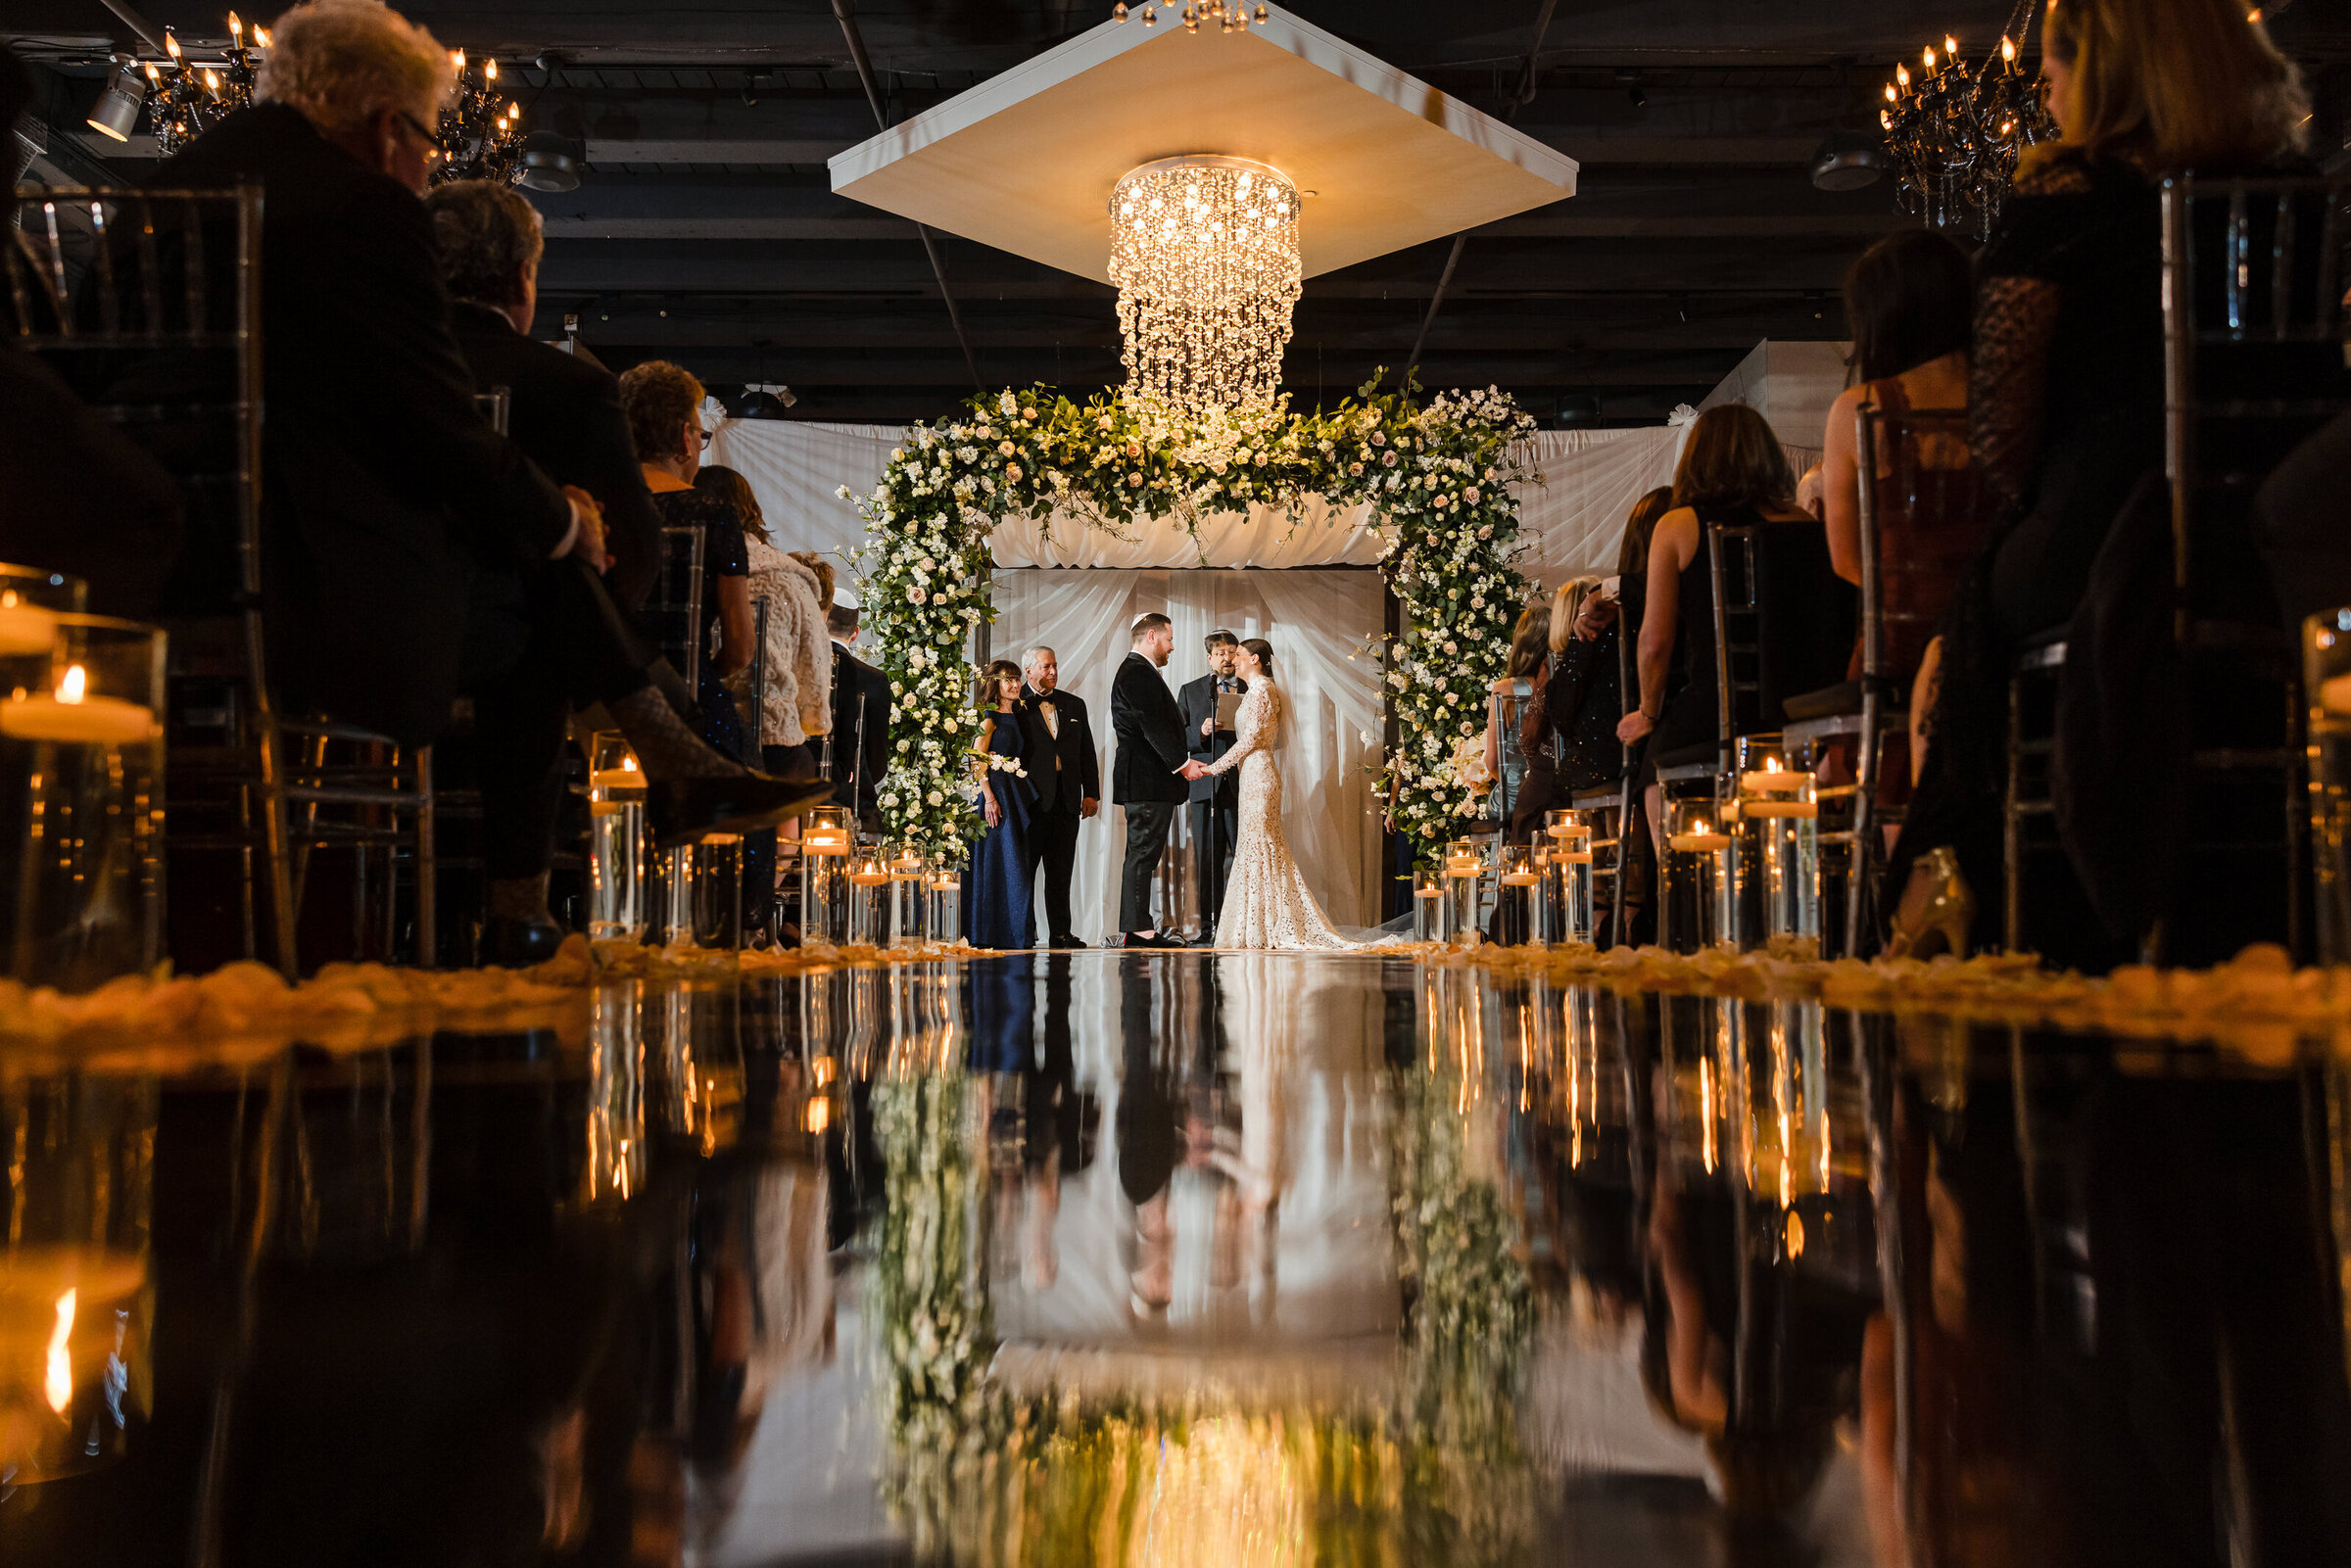 Wide angle view of the Jewish wedding ceremony at Tendenza reflected on the glass aisle runner